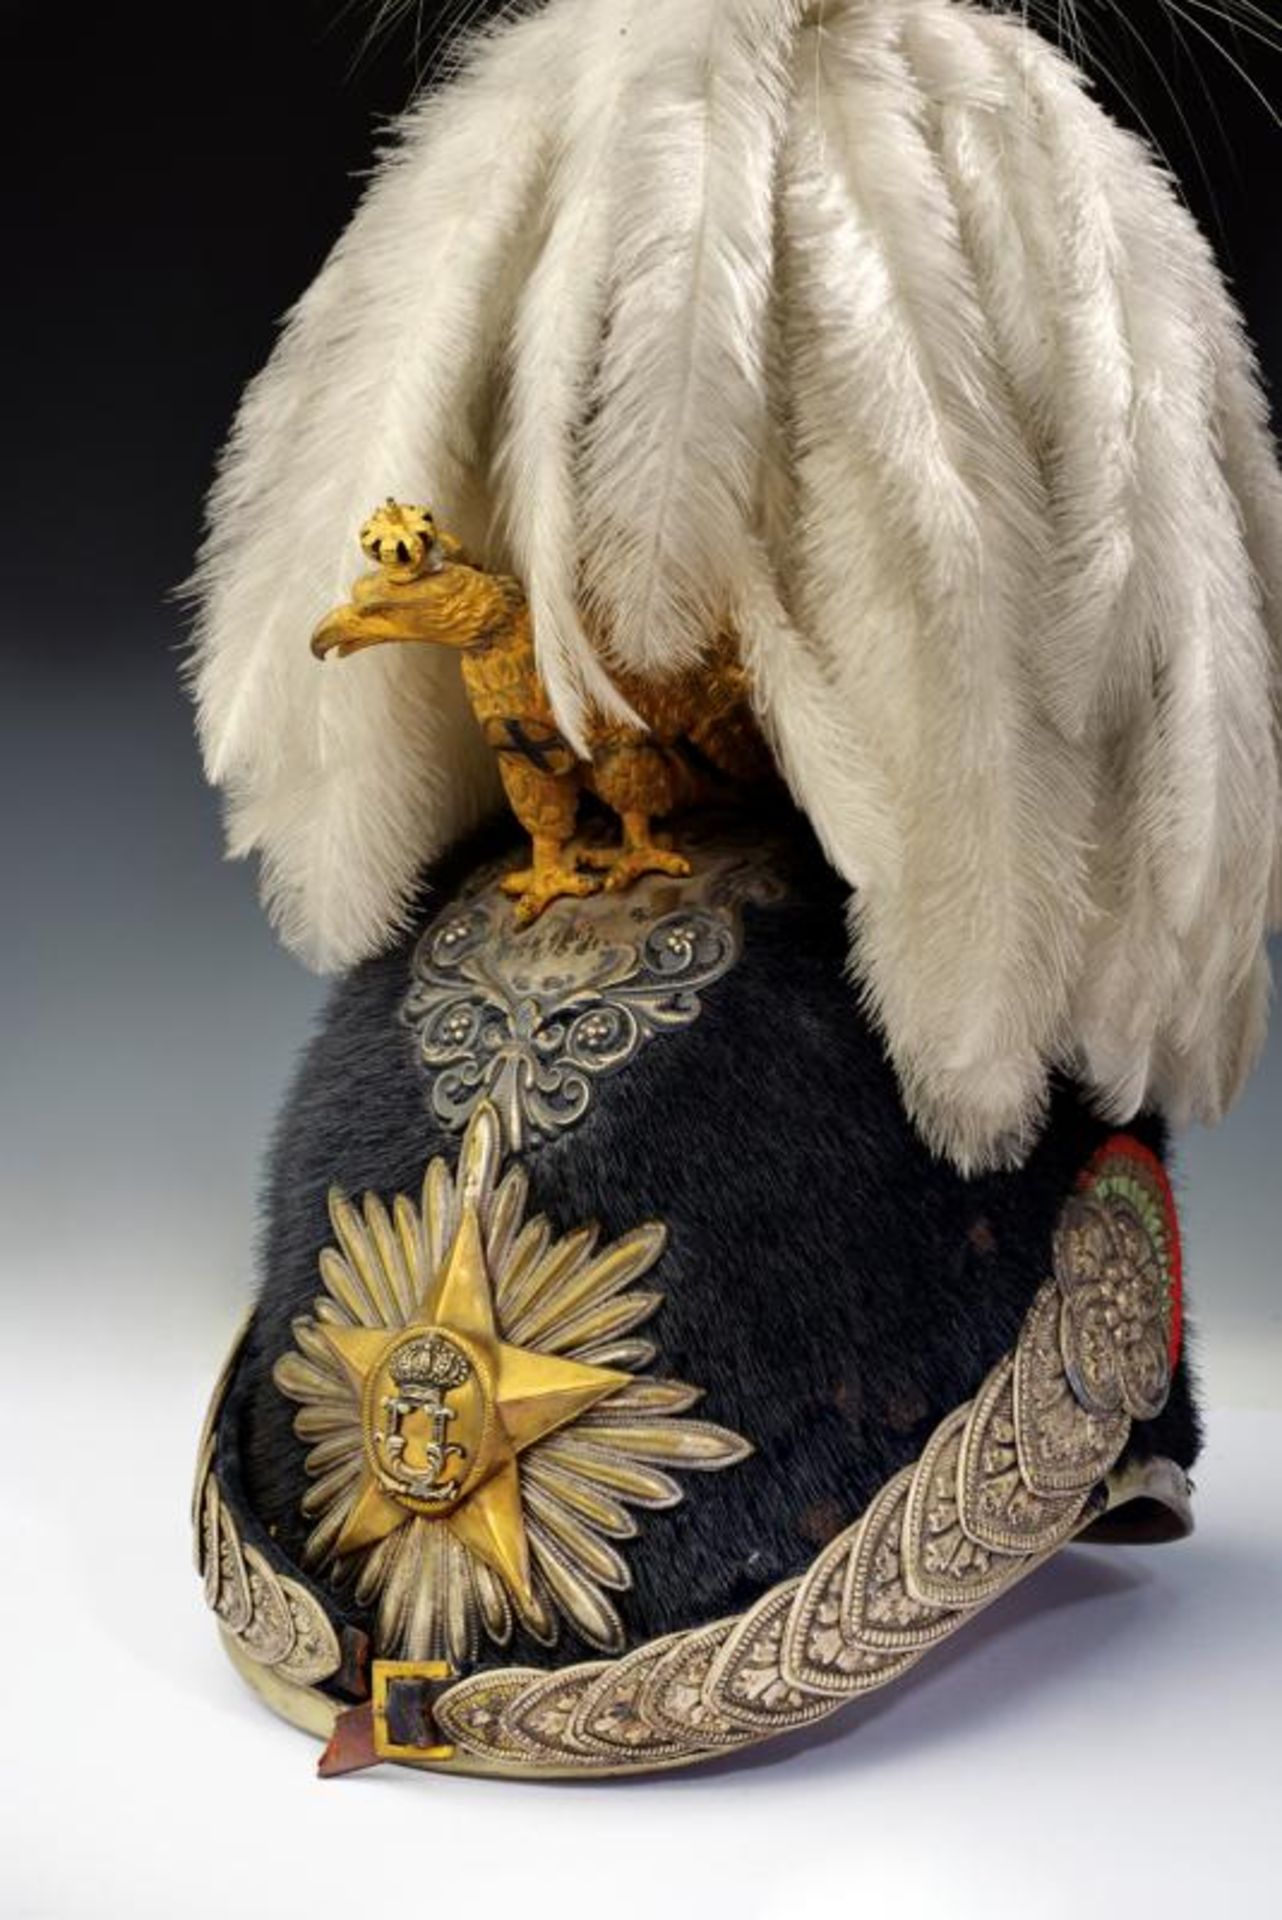 A general's helmet from King Umberto period